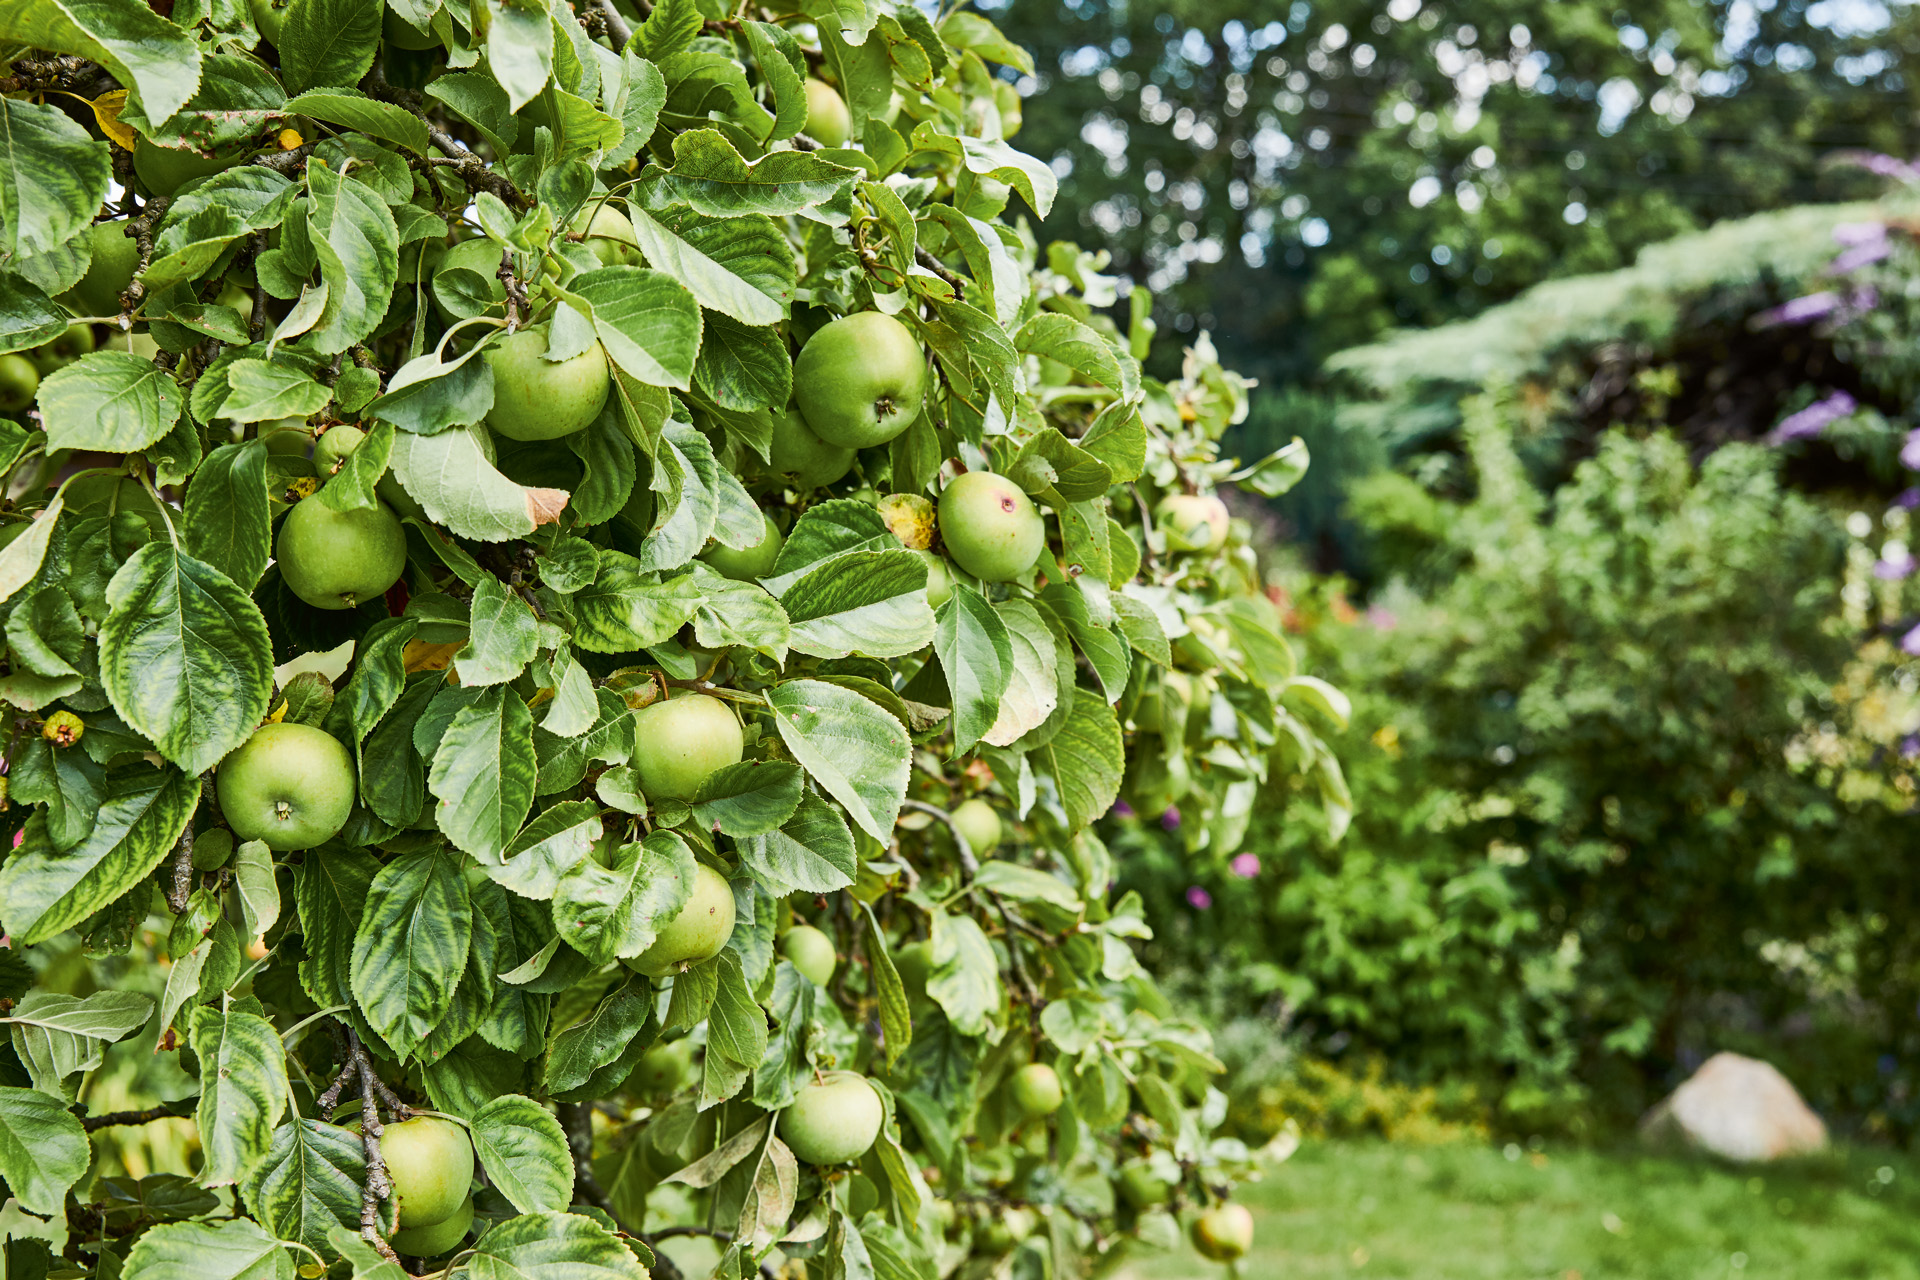 Green apples on a tree in the foreground, with bushes and other trees behind